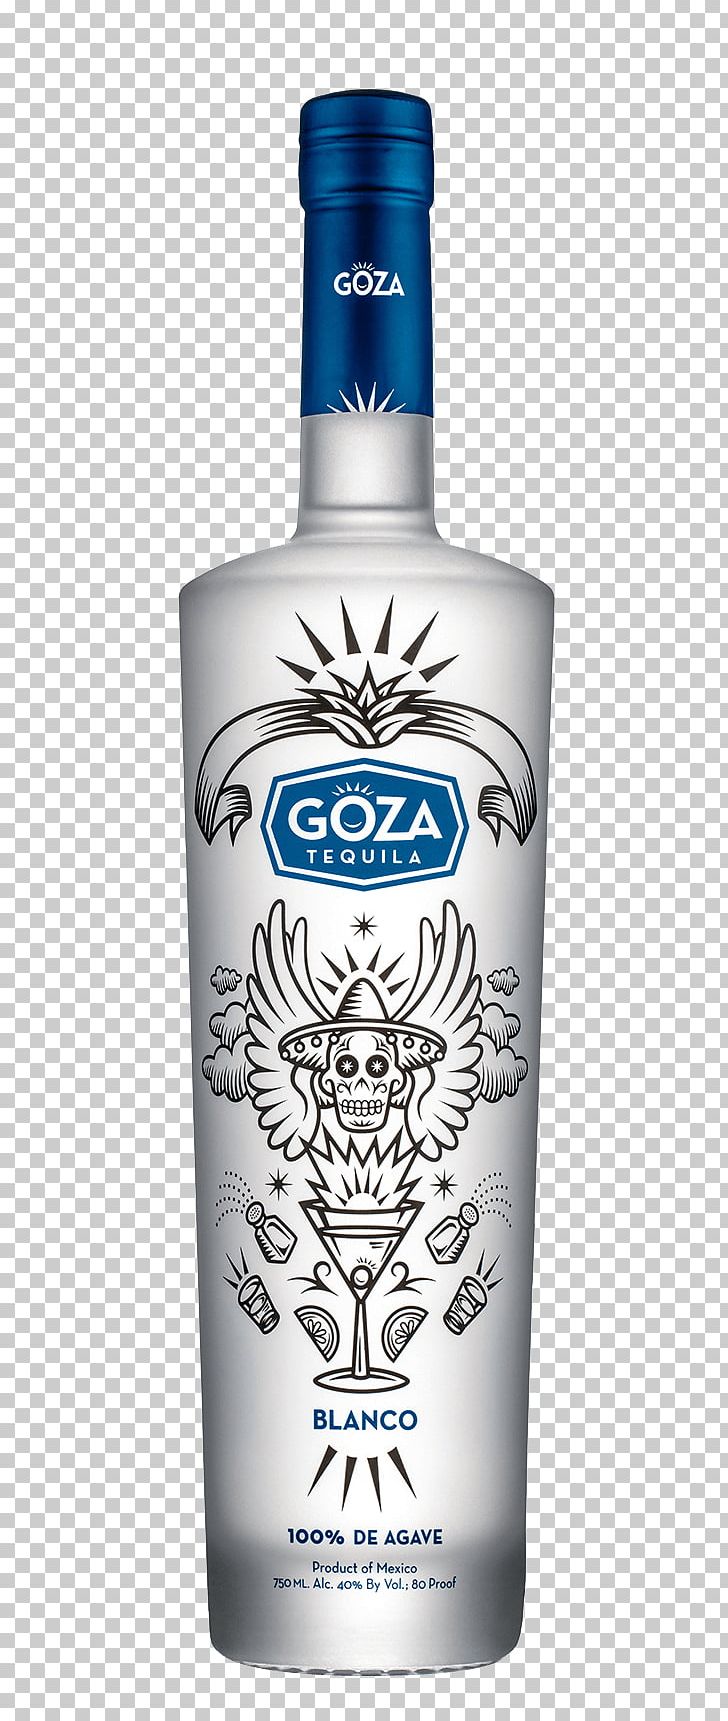 Vodka Tequila Distilled Beverage Mexican Cuisine Agave Azul PNG, Clipart, Agave, Agave Azul, Alcoholic Beverage, Azul Tequila, Bacardi Free PNG Download